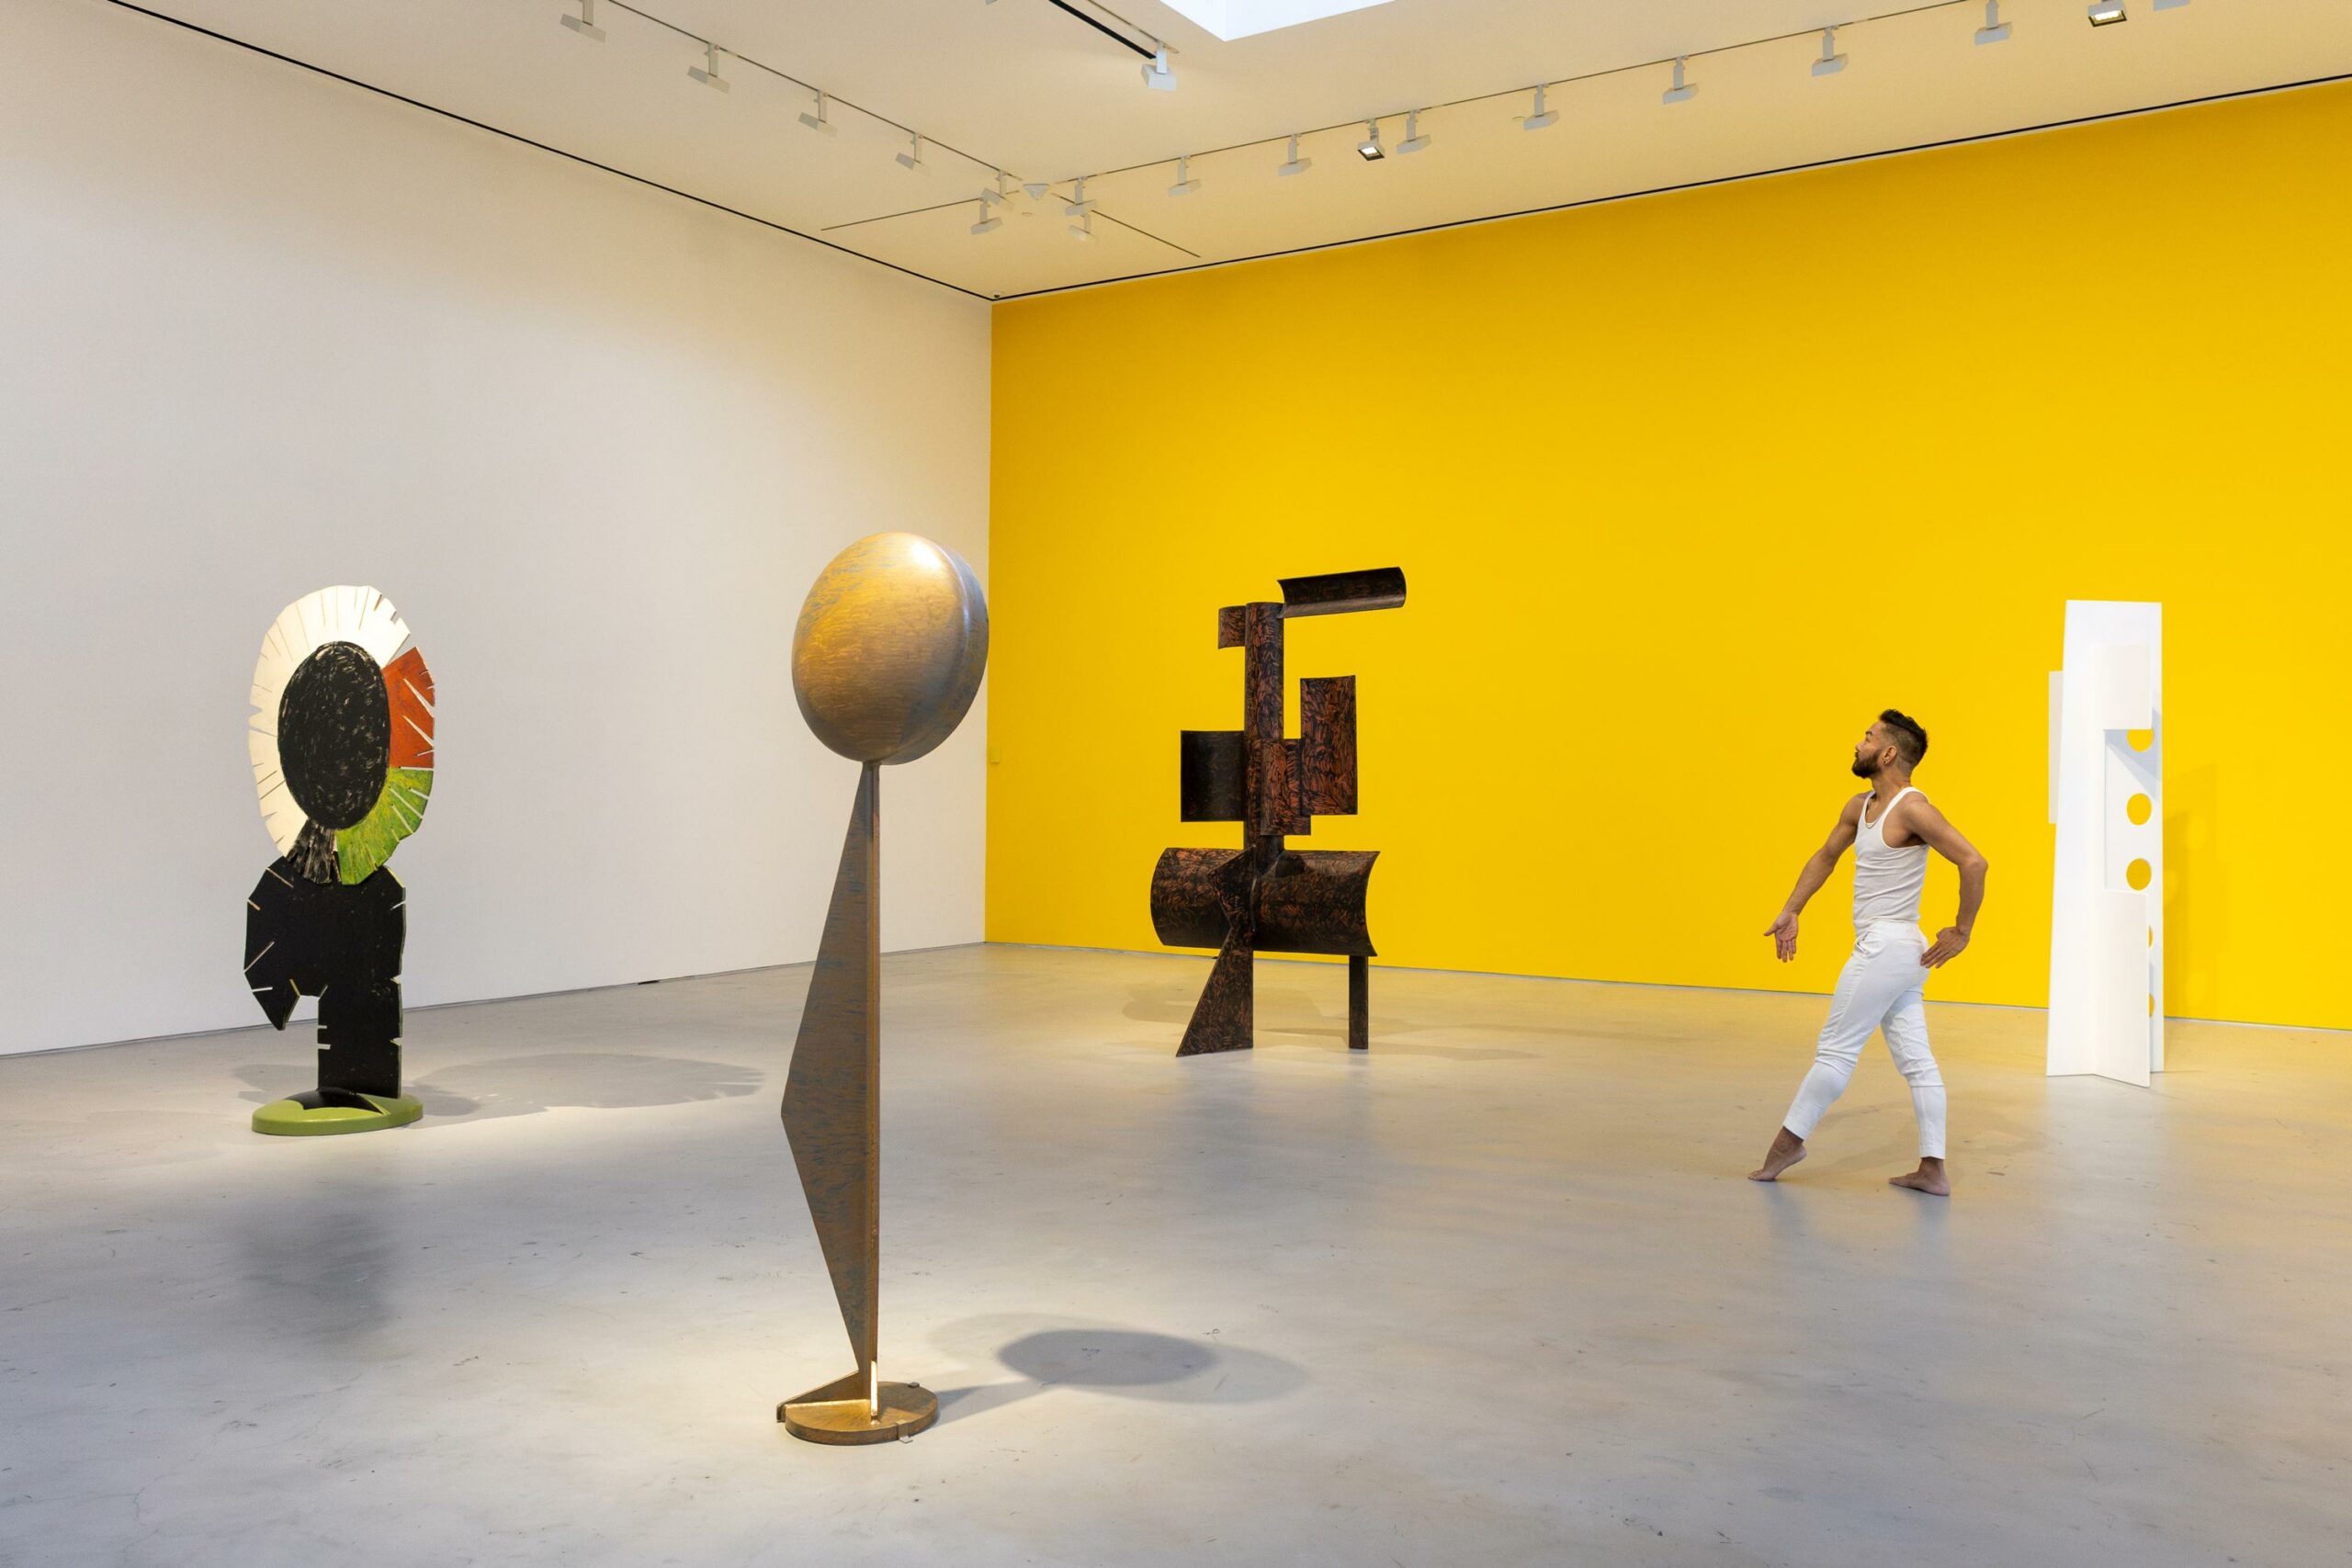 Wide exhibition view of 4 large geometric sculptures and a model wearing white posing still in front of a bright yellow wall.